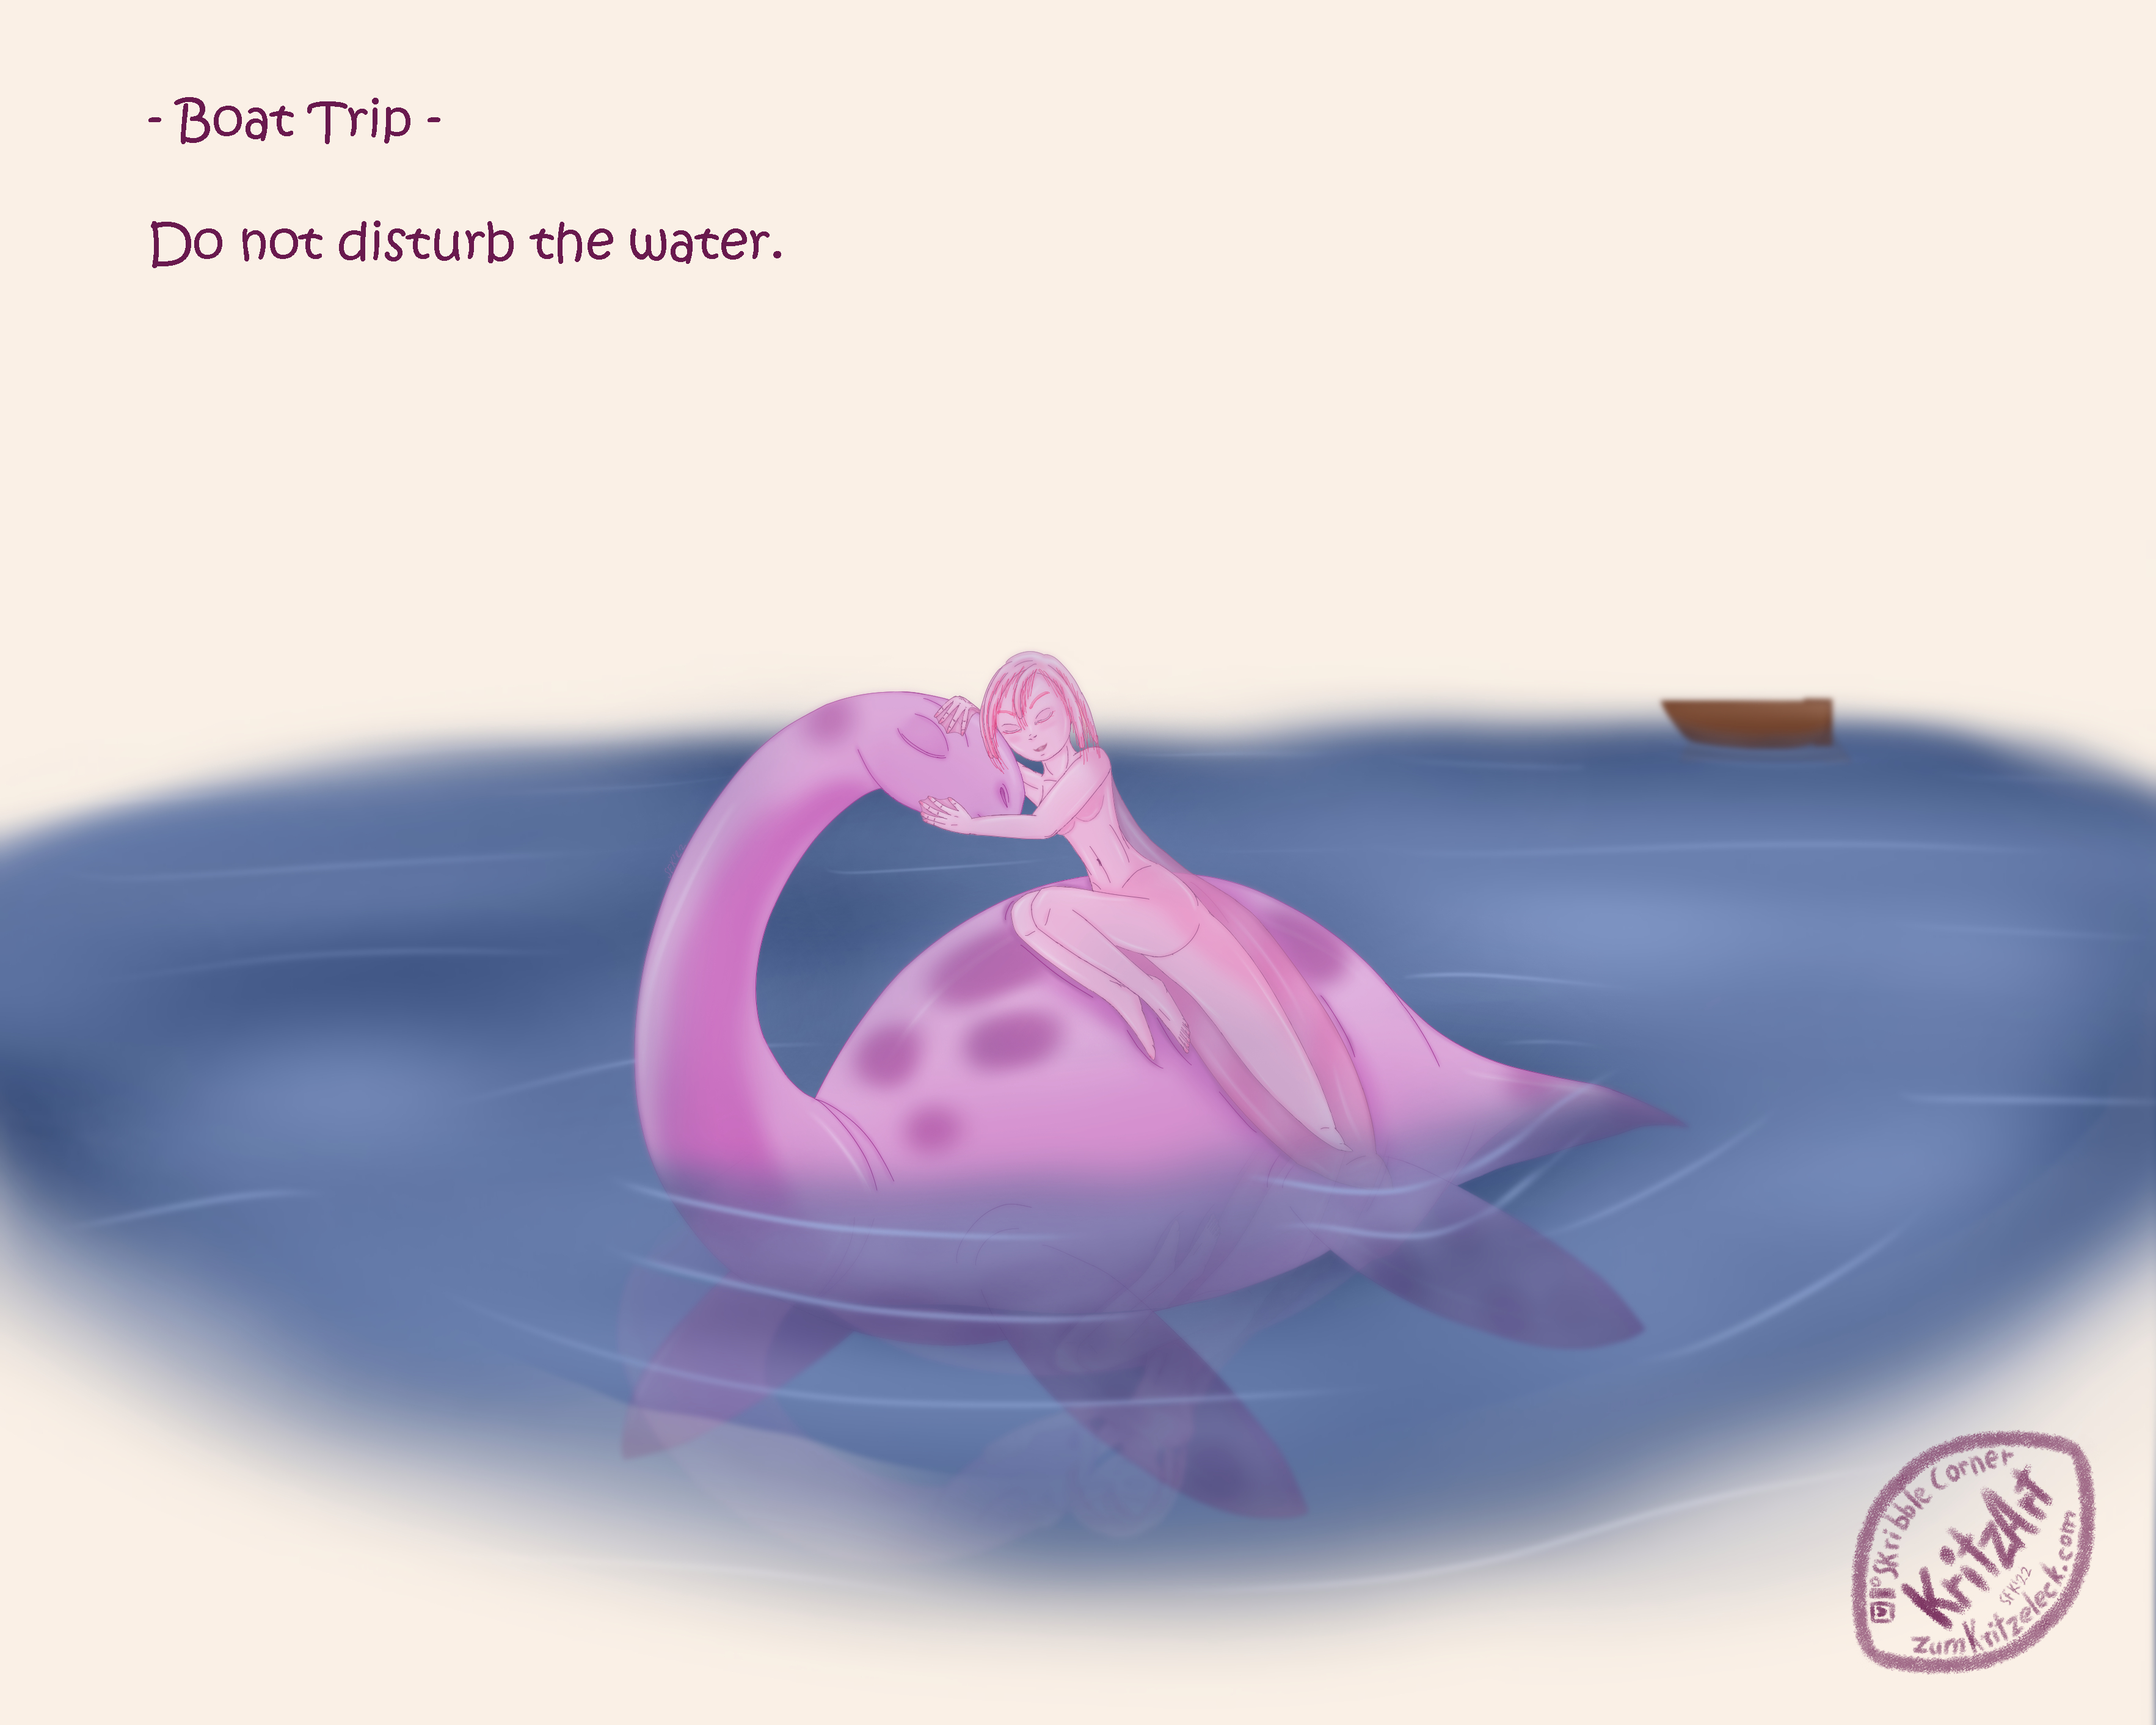 Digital painting, comic style, light background: A plesiosaurus-like pink and purple sea monster in a lake, the neck is bowing towards its back, the eyes closed; on Nessie's back a mermaid with the features of a light pink axolotl, the gills building the hair; she is leaning with closed eyes agains Nessie's head, the webbed hands petting her head and mouth; a boat in the background text "Boat Trip - Don't disturb the water."